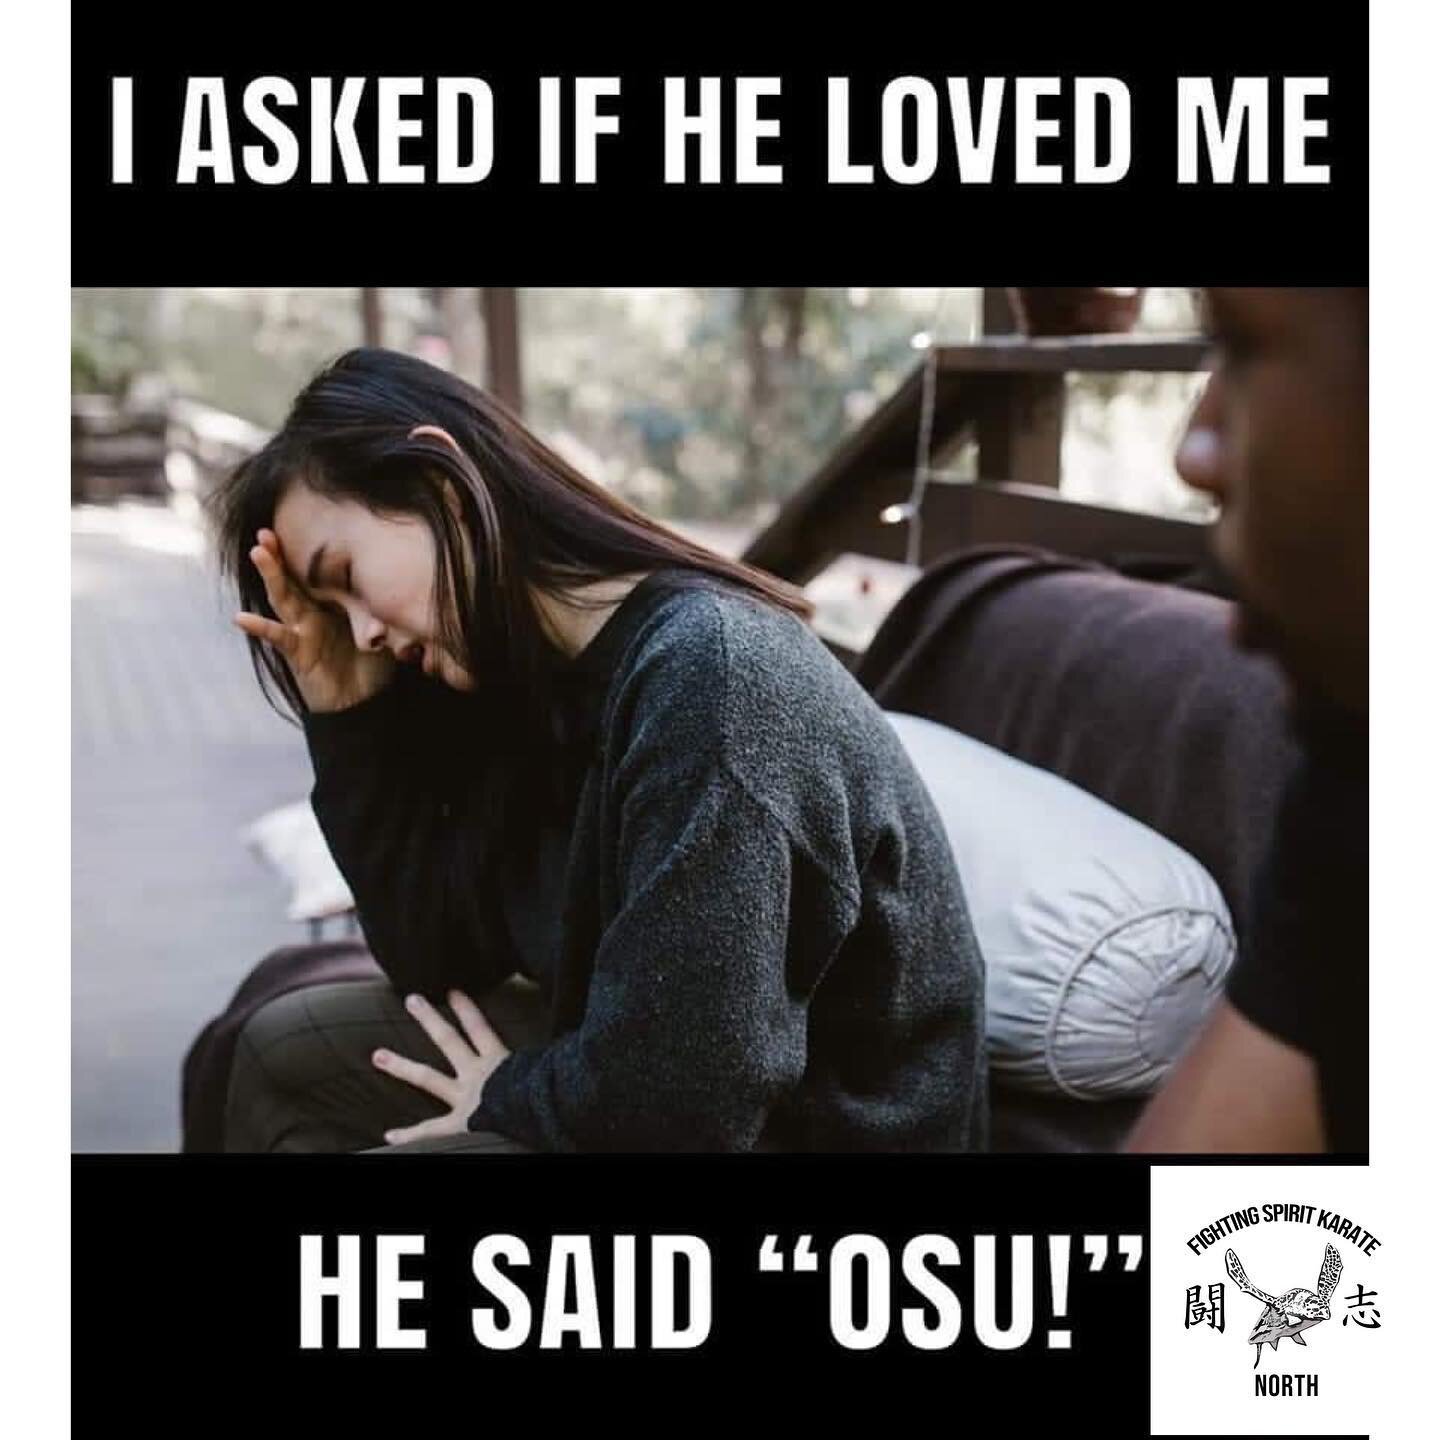 Could happen to the best of osu. &ldquo;They just hate Osu, cause they ain&rsquo;t Osu.&rdquo; #osu #kyokushin #karate